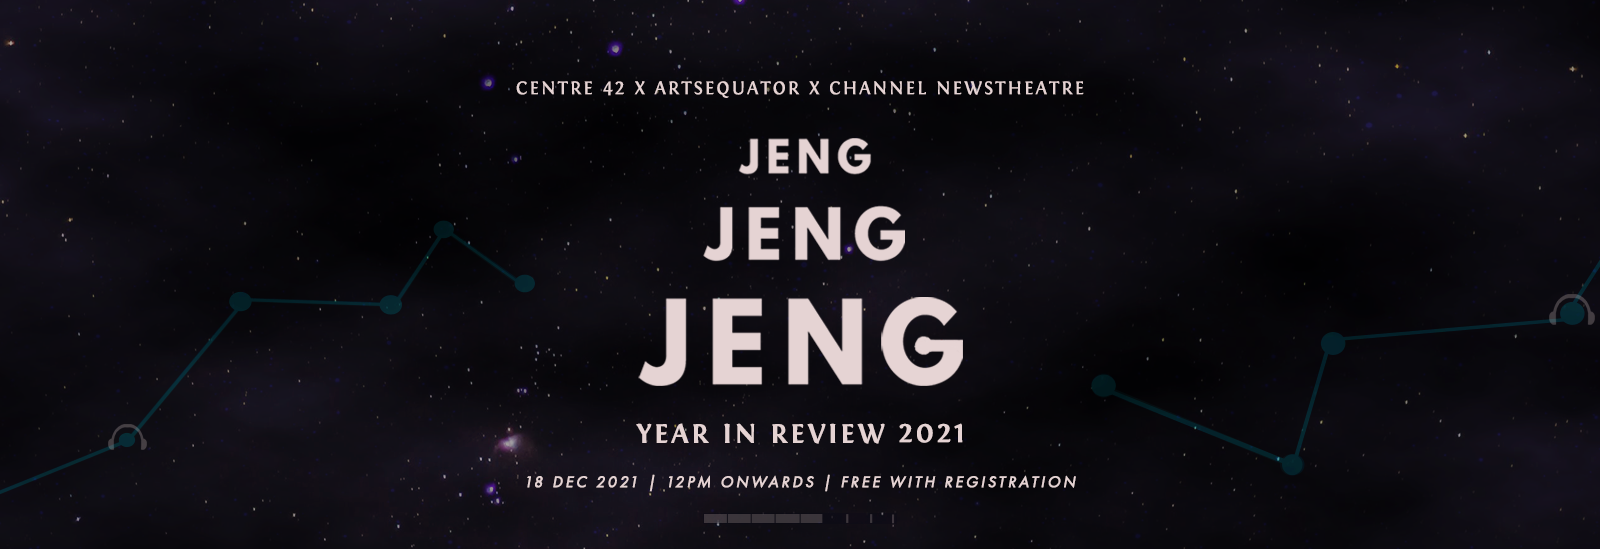 Year in Review 2021_Website Banner